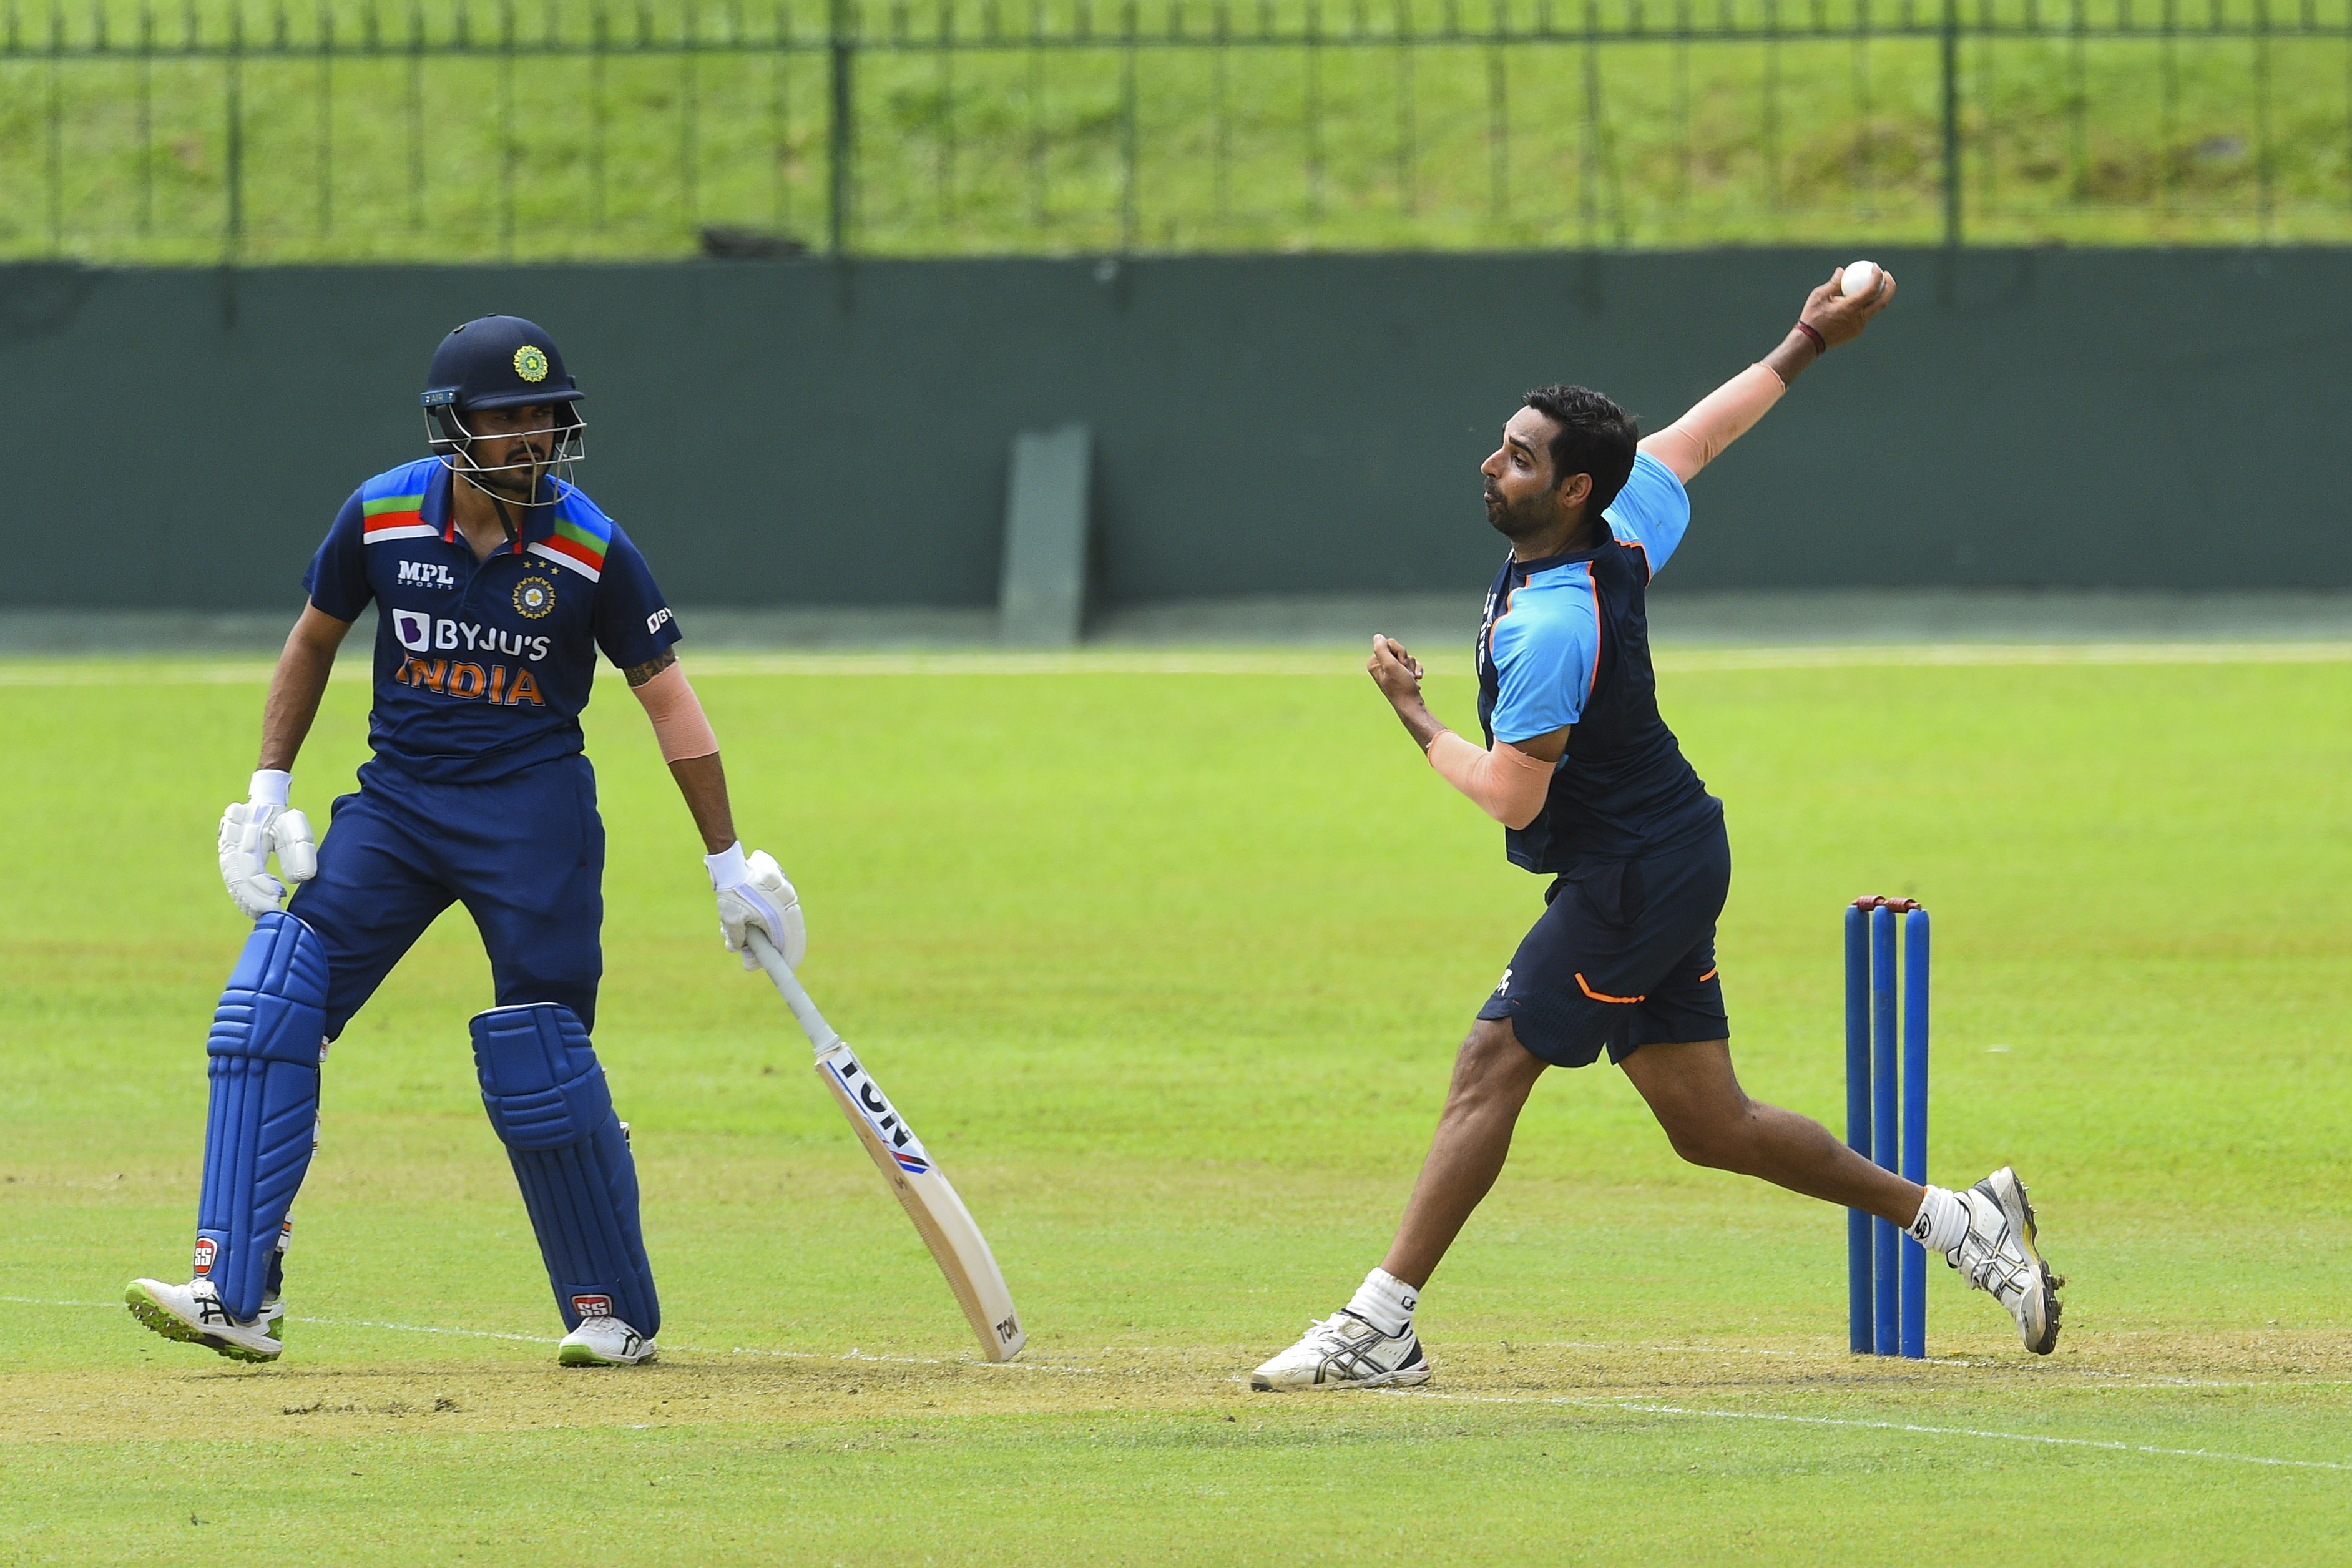 Bhuvneshwar Kumar in action during the intra-squad match | BCCI/Twitter